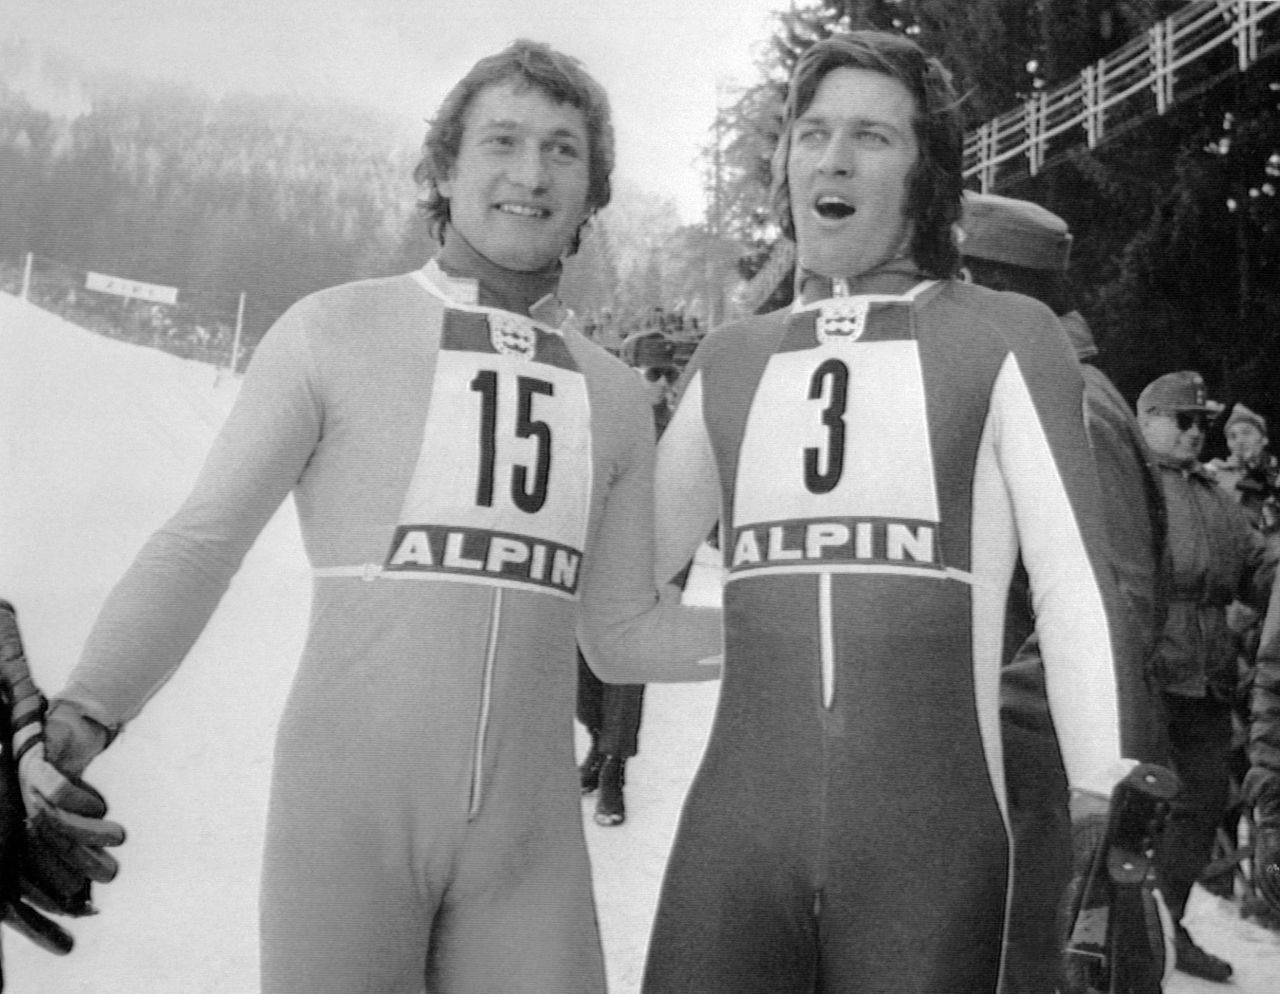 Franz Klammer (left) won gold in the 1976 Olympics in downhill with Bernhard Russi (right) in second place after a dramatic race in Innsbruck. 